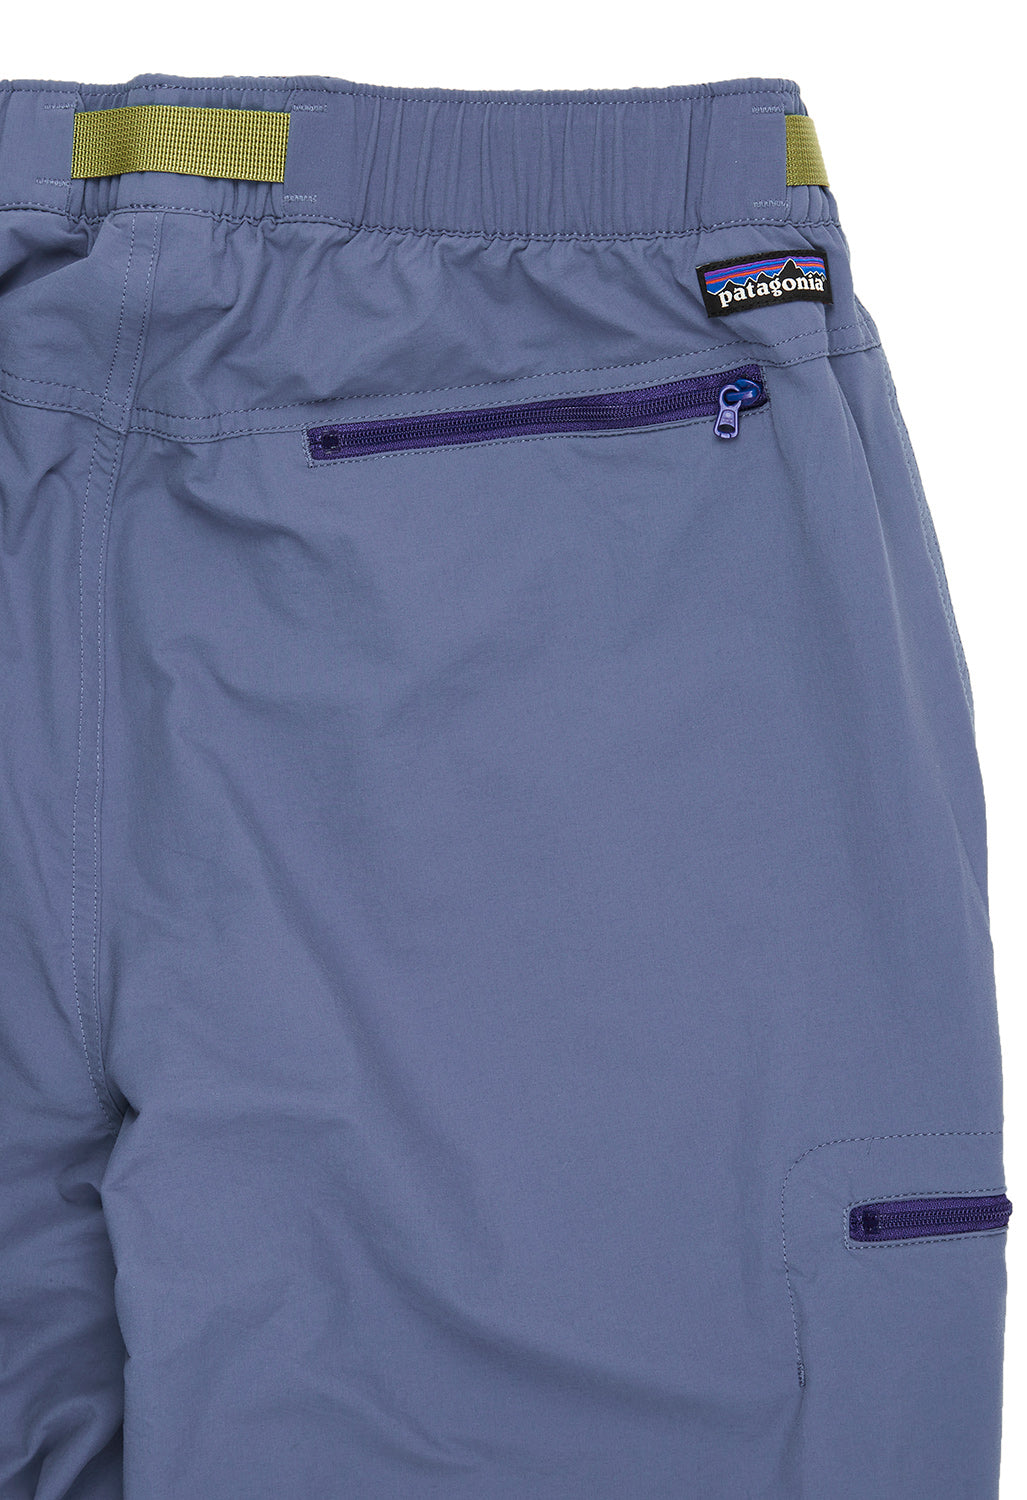 Patagonia Men's Outdoor Everyday Pants - Utility Blue